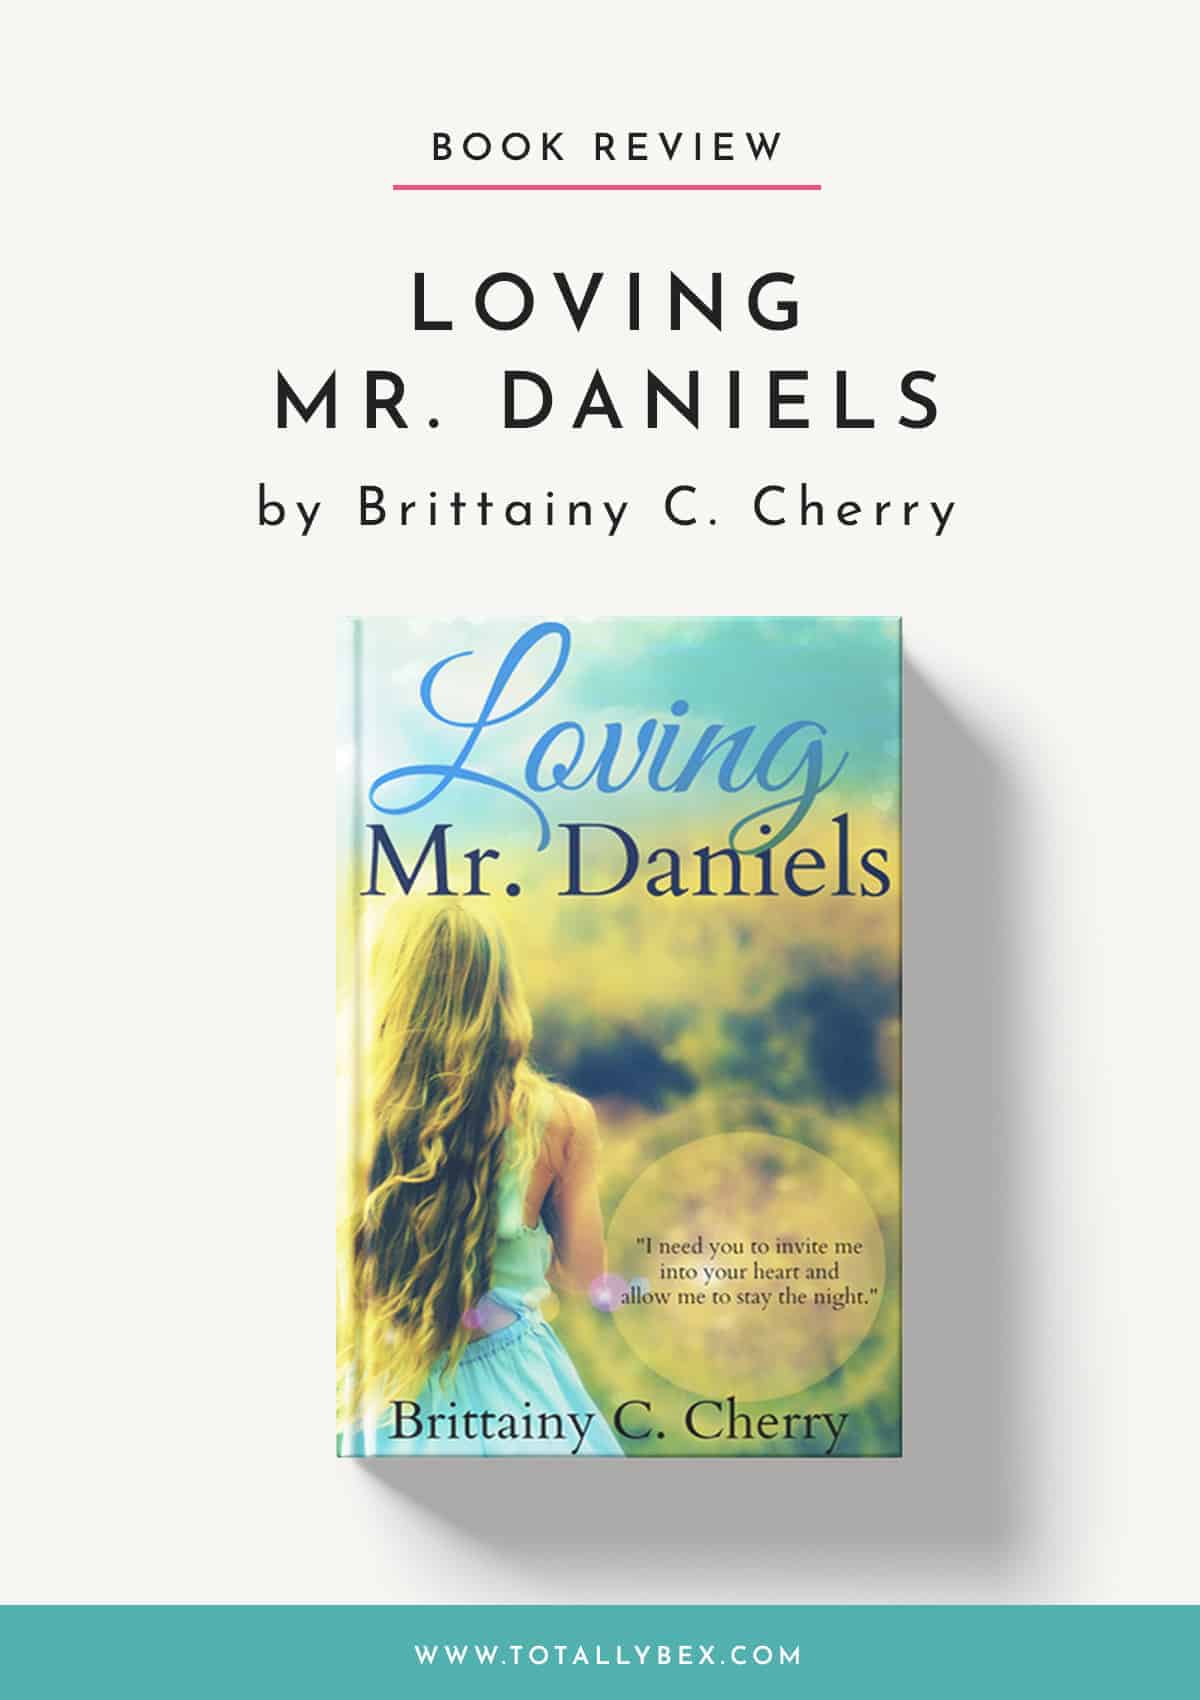 Loving Mr Daniels by Brittainy C Cherry-Book Review